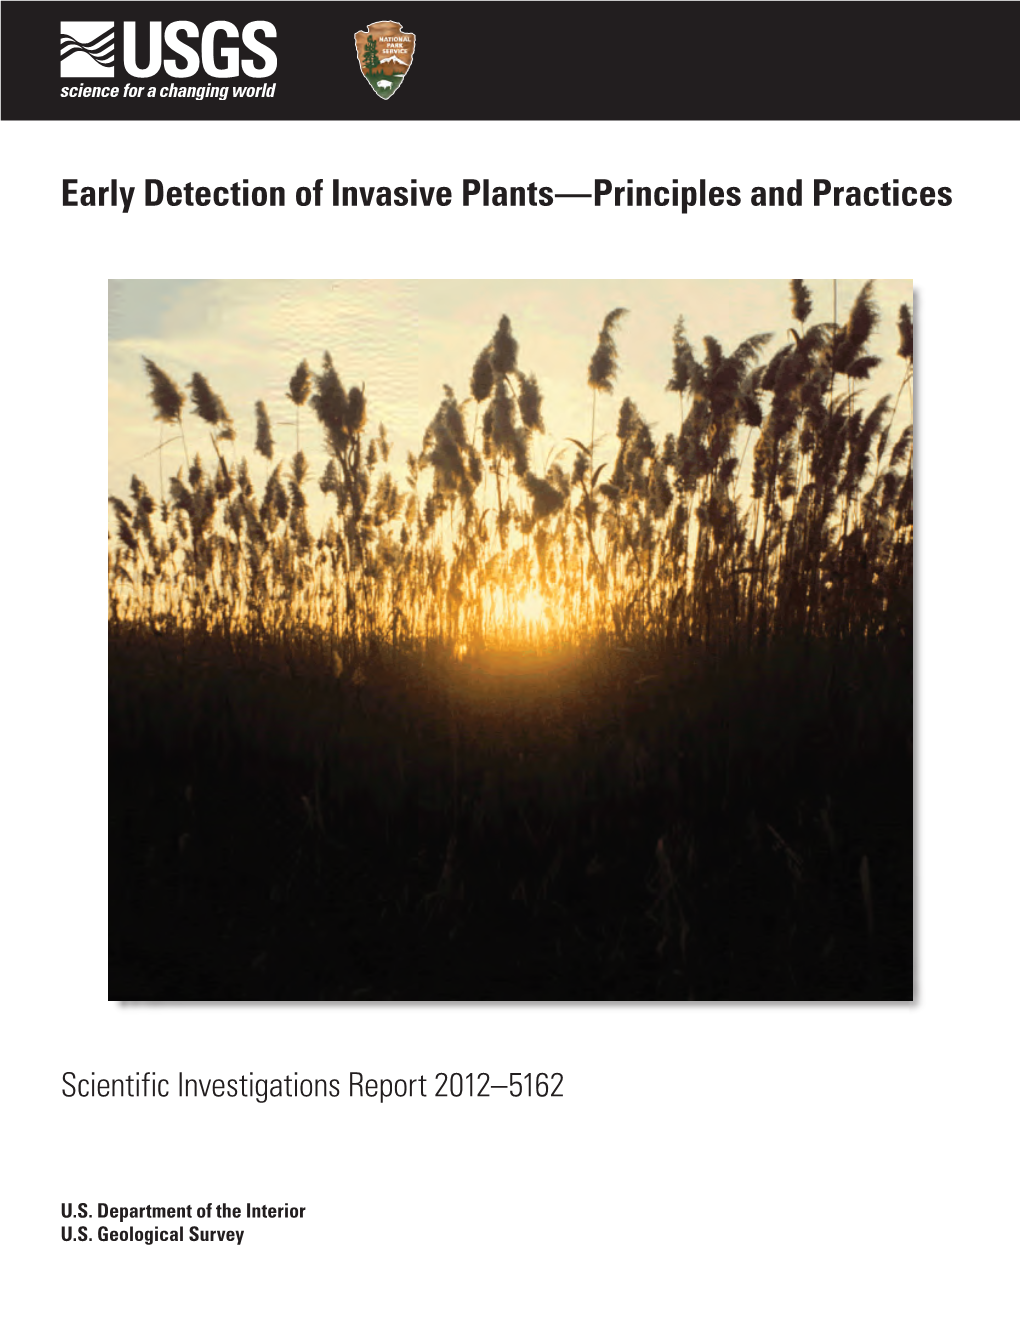 Early Detection of Invasive Plants—Principles and Practices